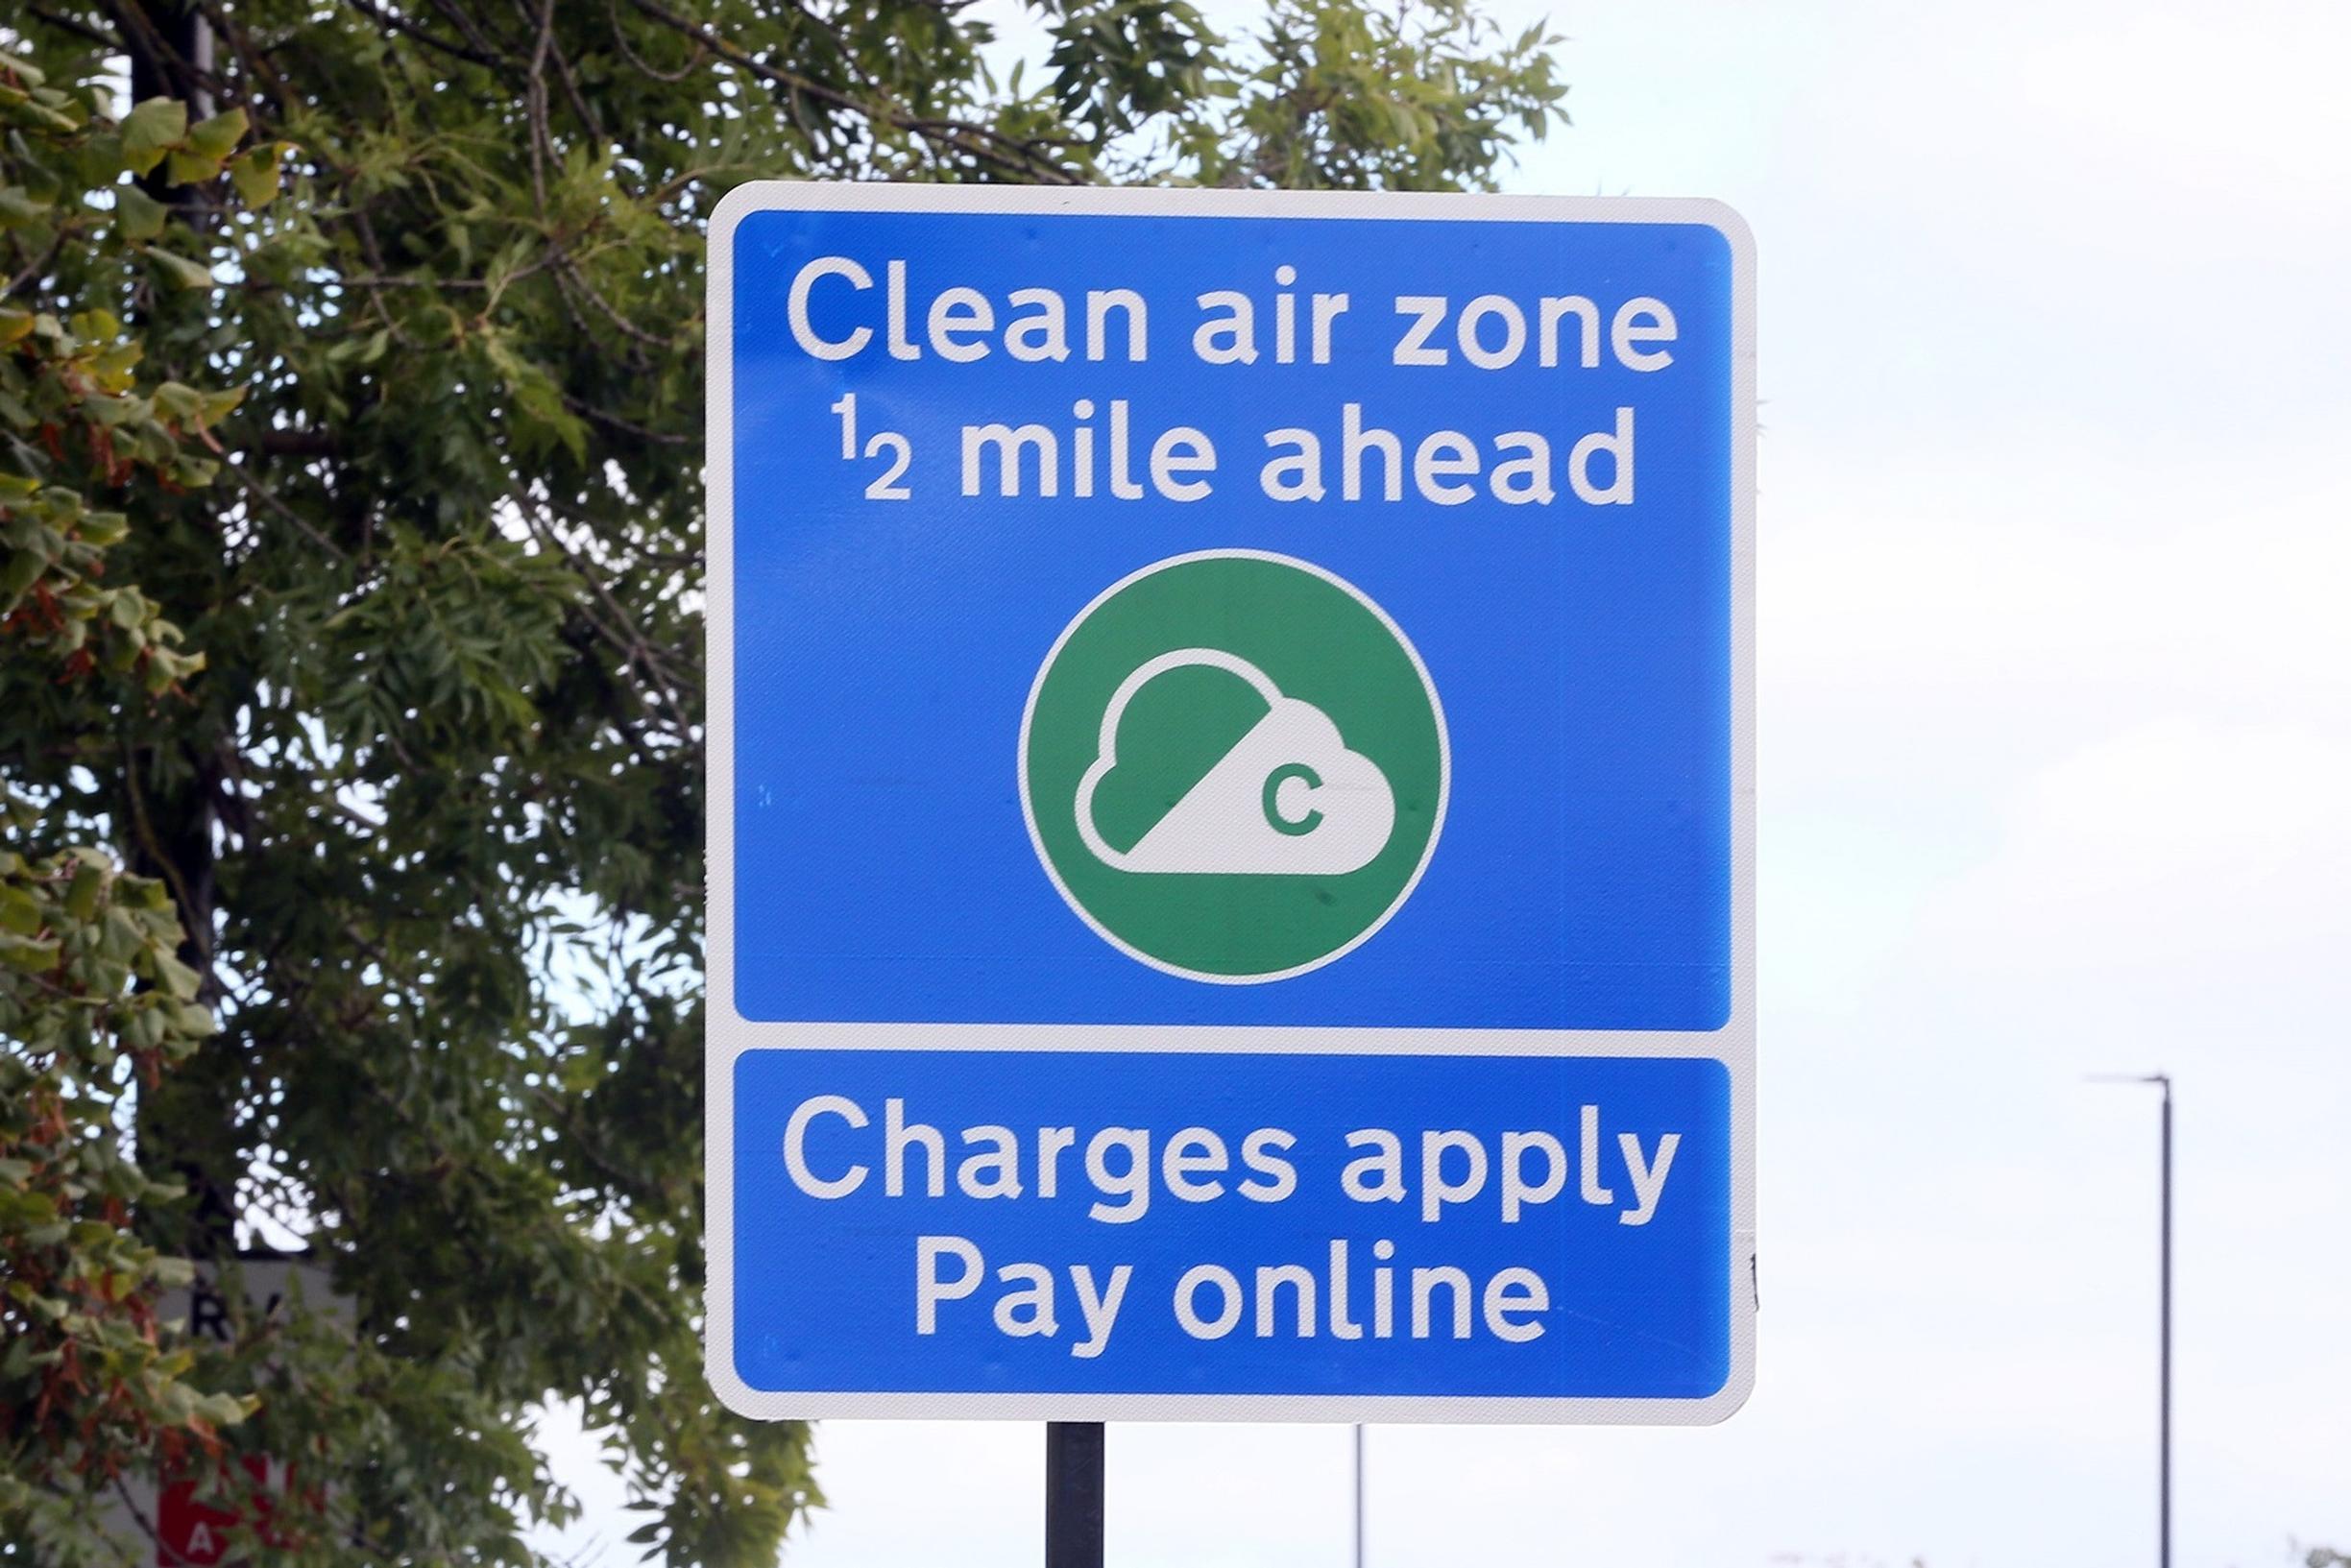 Vehicle lease scheme assists Sheffield businesses comply with clean air rules